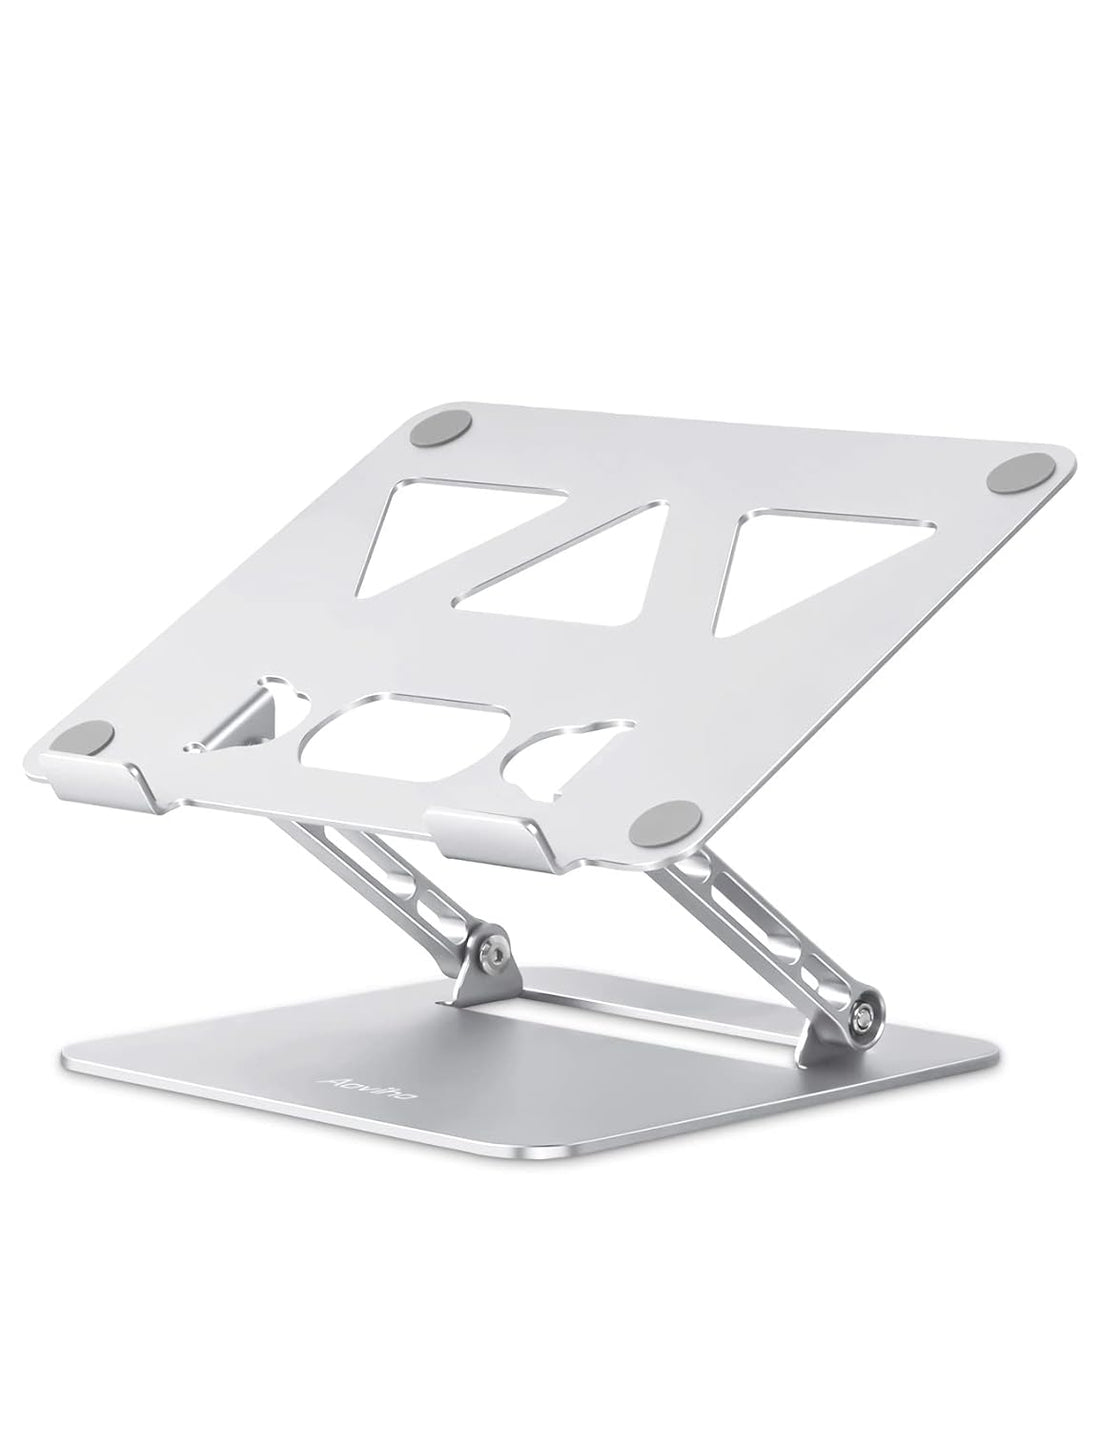 Aoviho Adjustable Laptop Stand for Desk,Portable Laptop Stand Holder and Riser,Foldable Aluminum Notebook Computer Stands for MacBook Air Pro HP Lenovo Dell Samsung Chromebook, 10-15.6 inch (Silver)